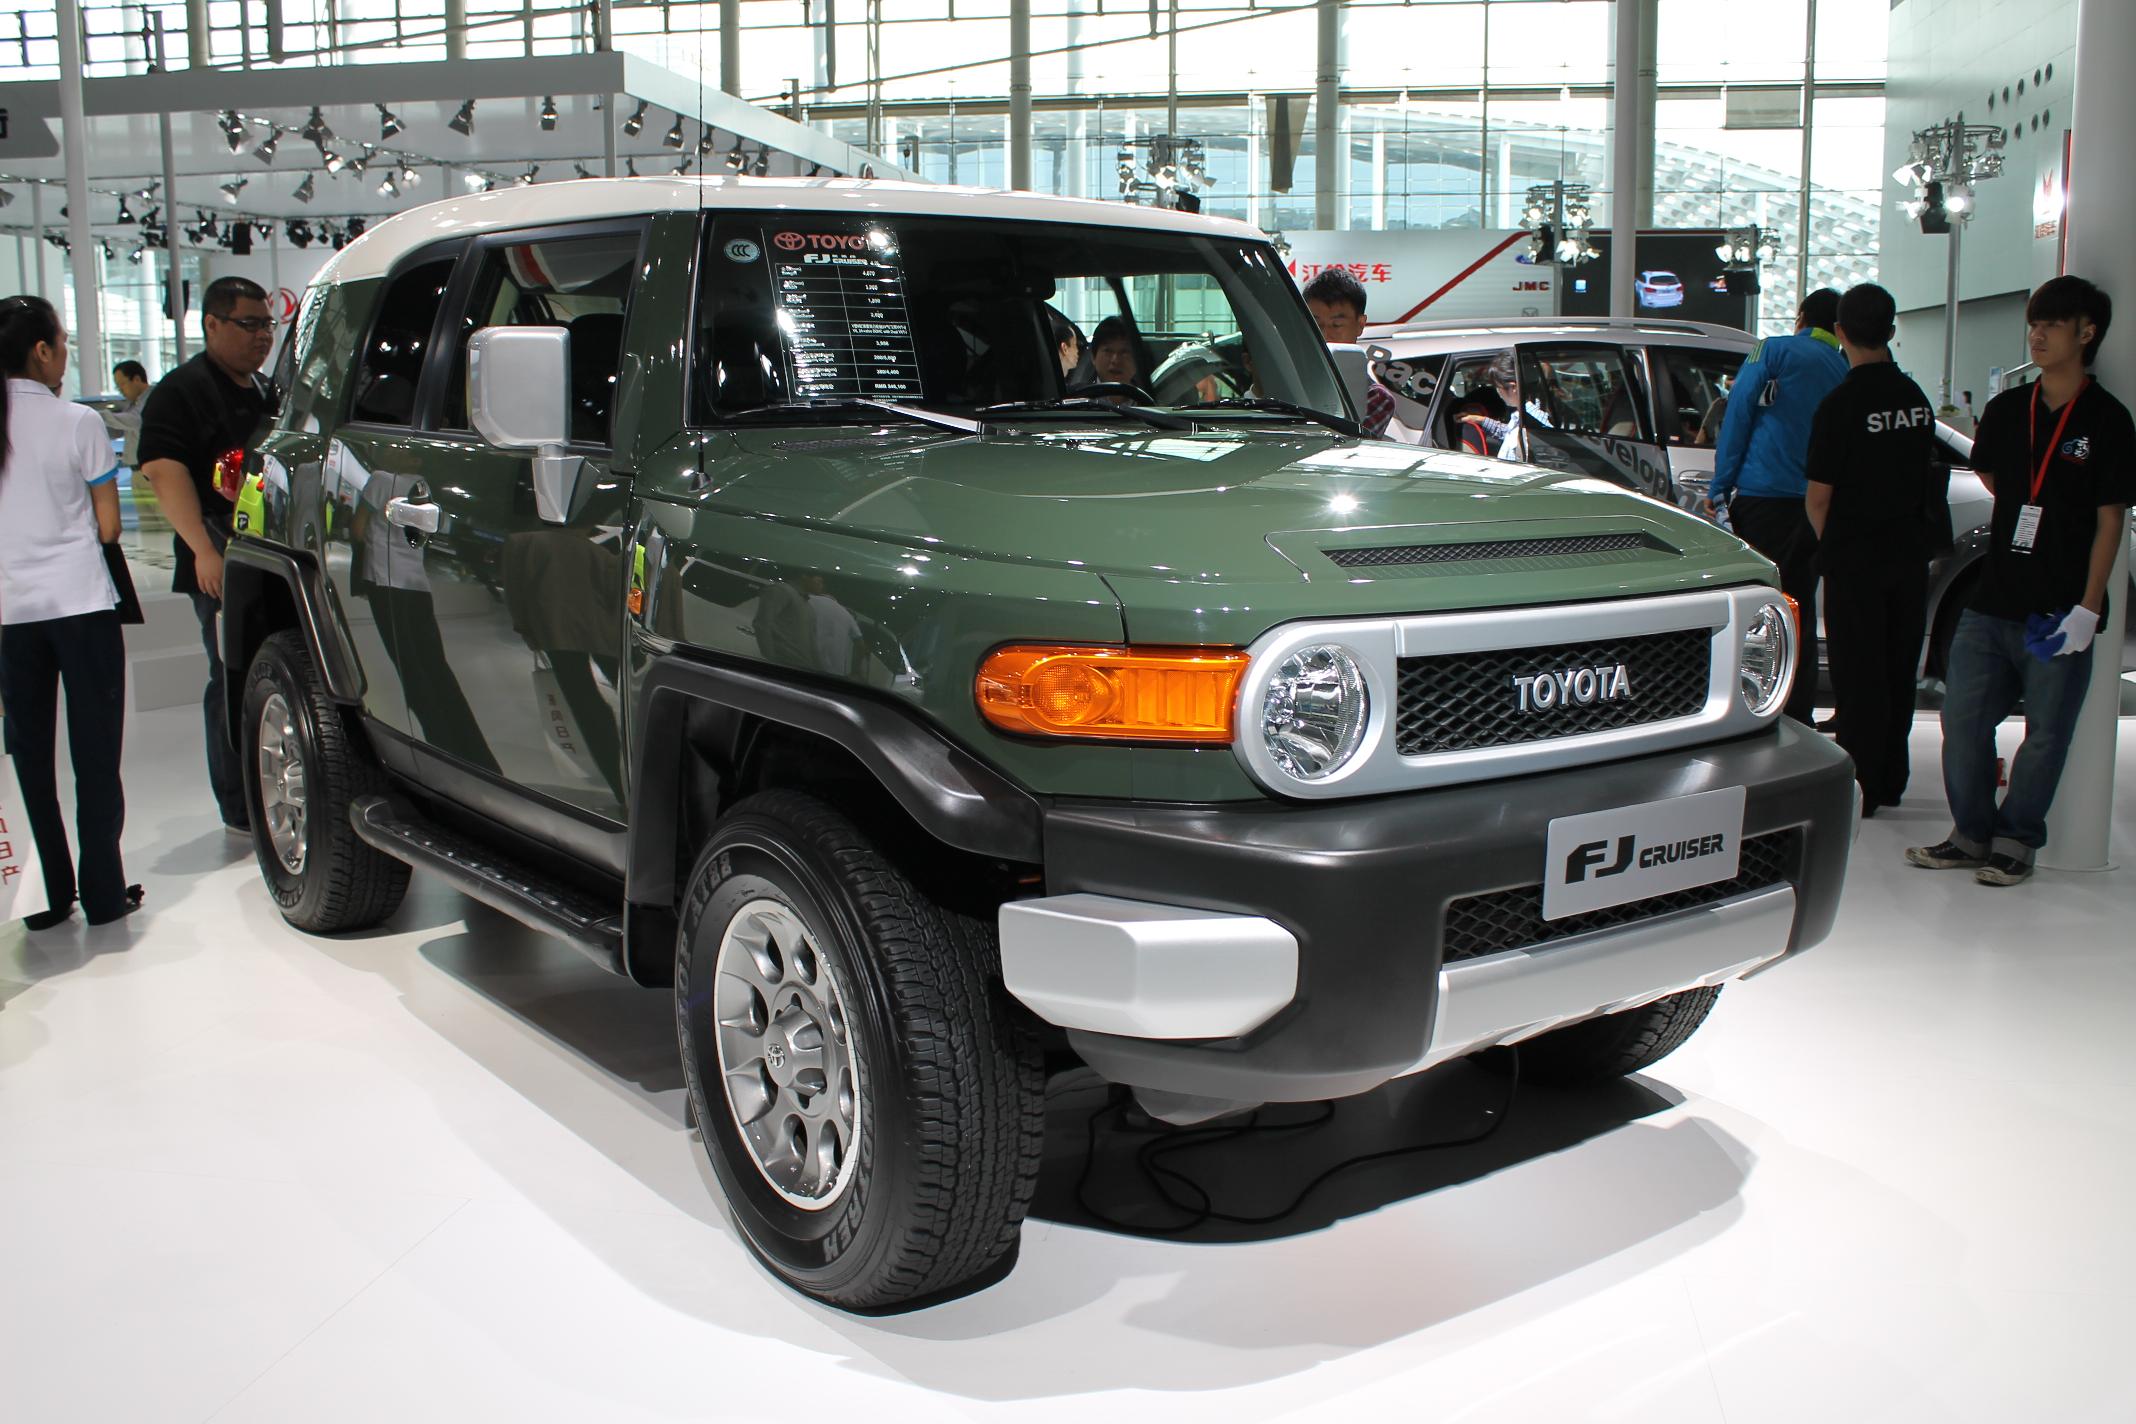 The FJ Cruiser was never officially introduced to the UK, but many were imported